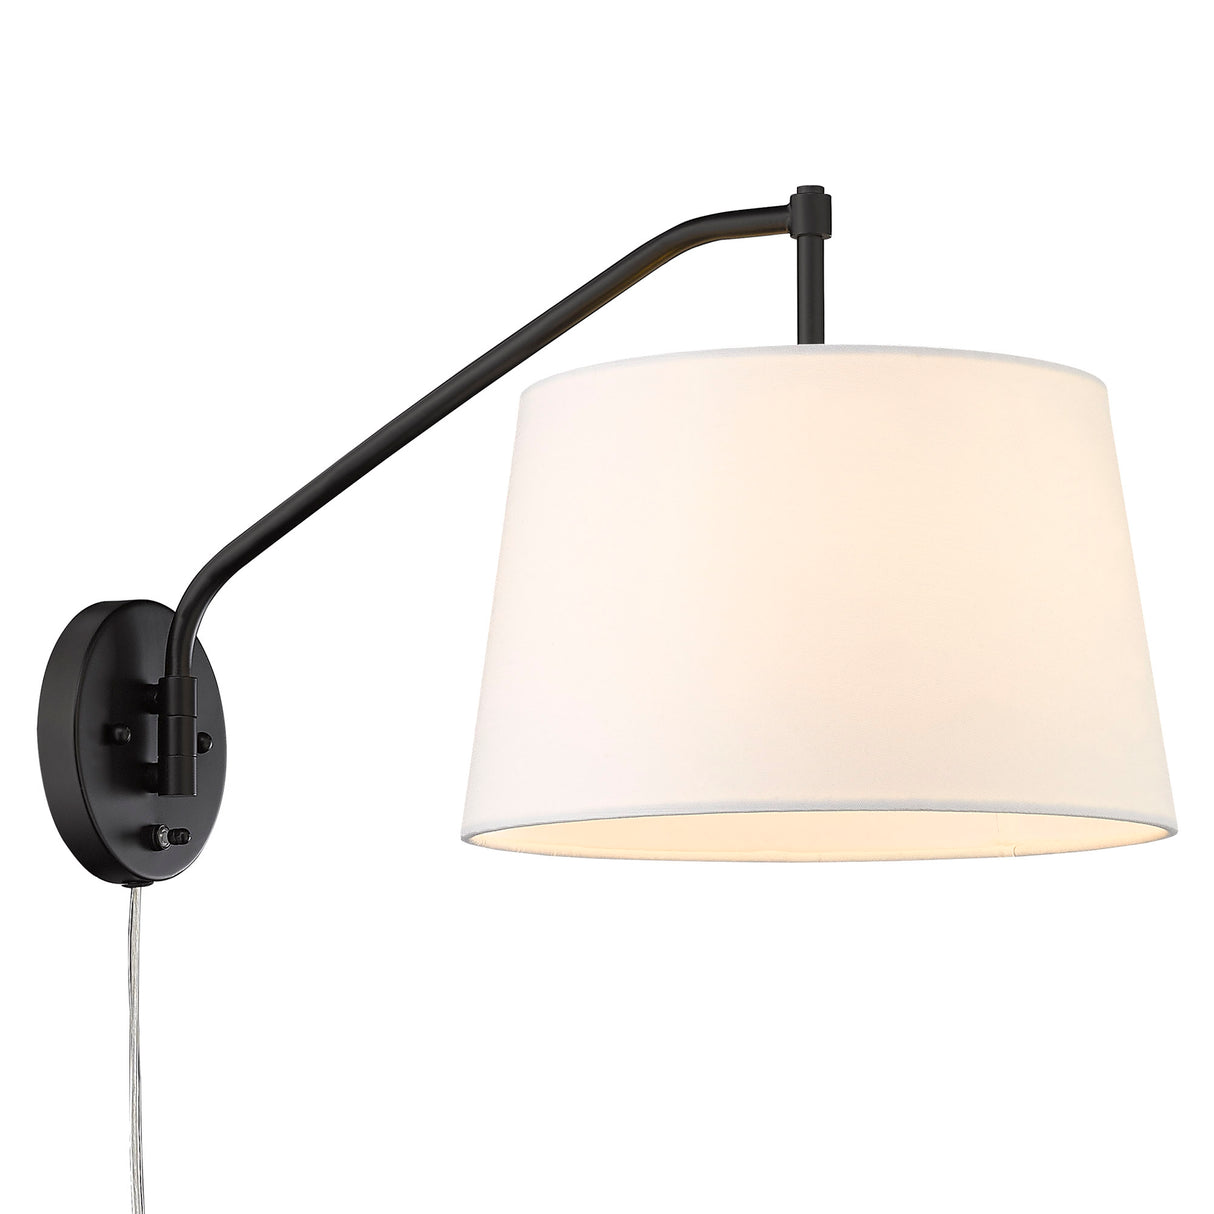 Ryleigh Articulating Wall Sconce in Matte Black with Modern White Shade